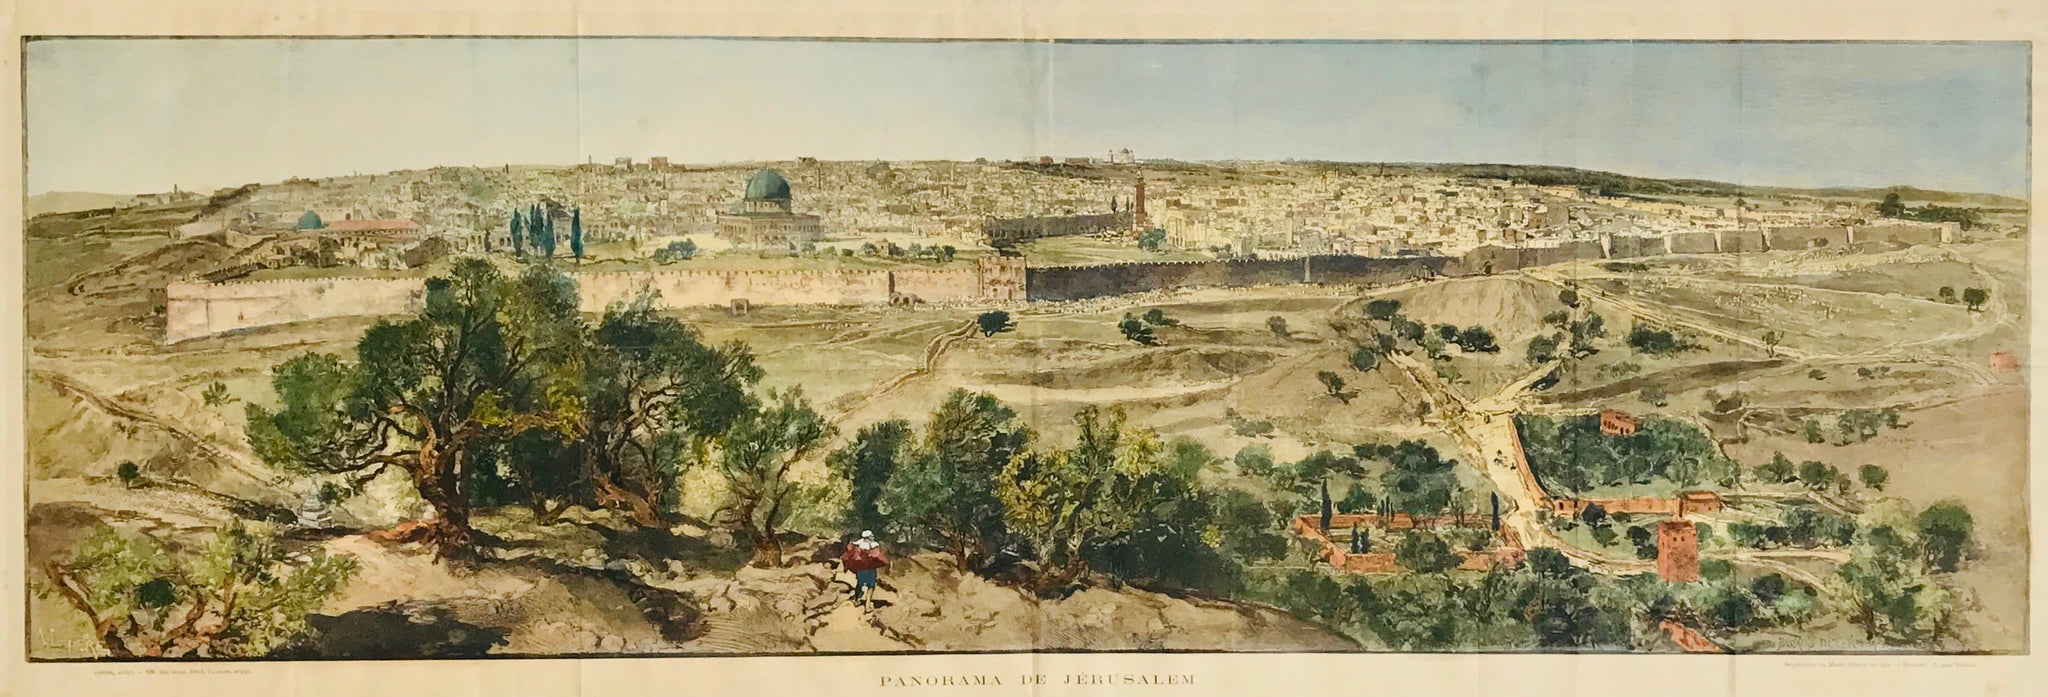 "Panorama de Jerusalem"  Hand colored wood engraving by Beltrand, Dete and Florian after the painting by Auguste Lepere (1849 - 1918). Published in ãLe Monde Illustre, Paris, ca. 1890.  This oversized panorama of the Holy City is a superb general view. Lepere was noted for his excellent rendering architecture.  General age toning. Engraving has several vertical folds to fit book size. Very nice condition!